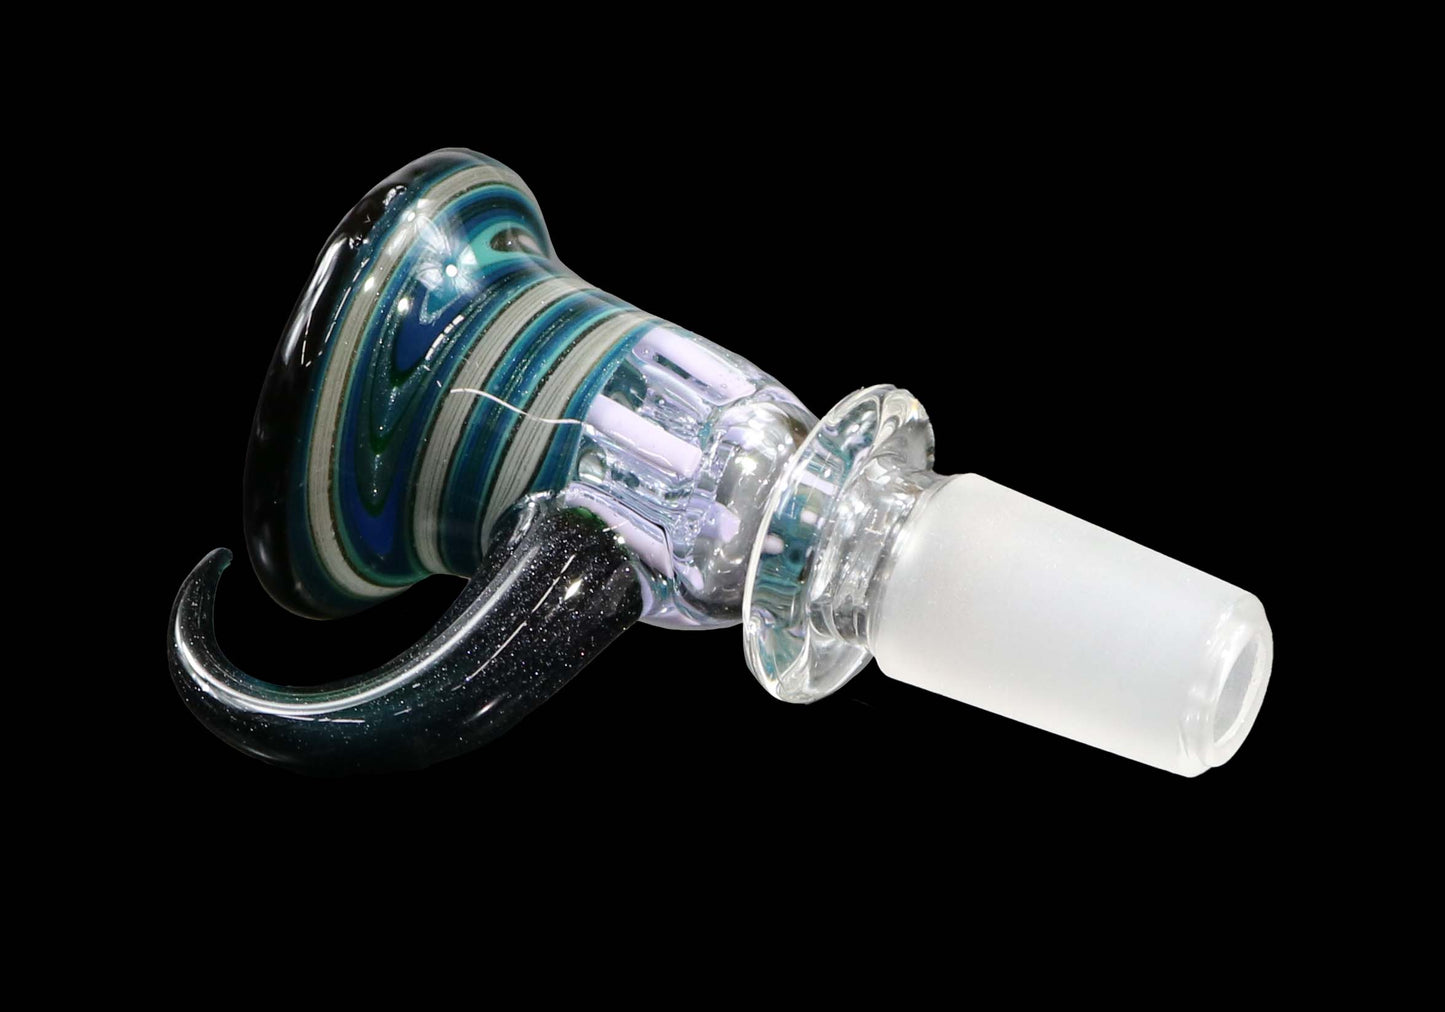 14mm Martini Bong Slide with built in screen from Glass by Slick - Blue/Green/Black